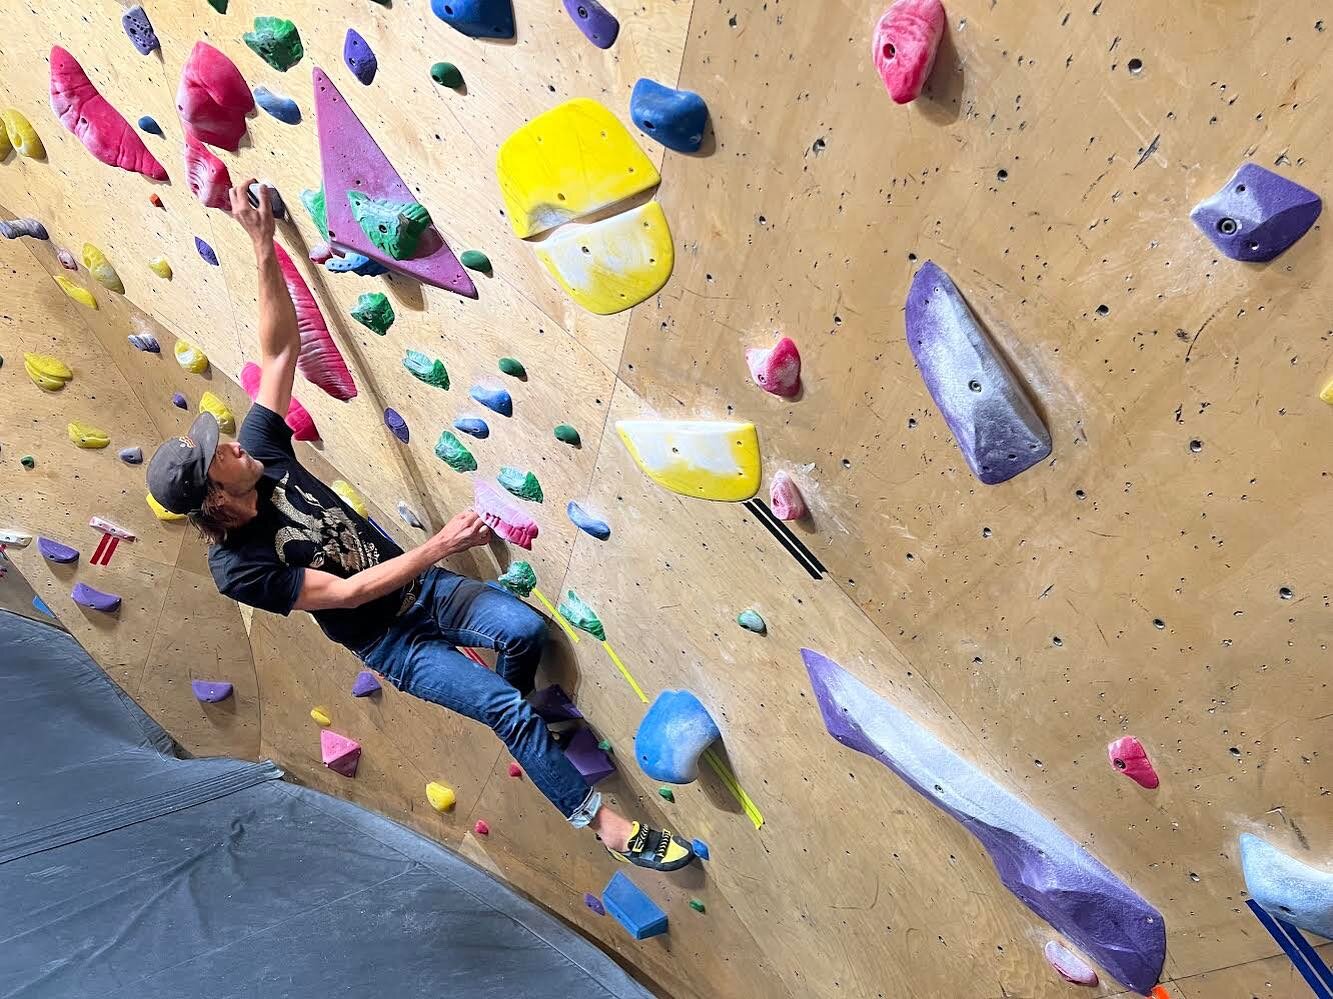 NEW! MSB ONLY Premium Membership (24/7 use of MSB at a reduced rate)! Only want to use Main Street Boulders? Well now you can climb at a reduced rate from our regular three facility (Flagstaff Climbing, Northern Arizona Yoga Center and MSB) membershi